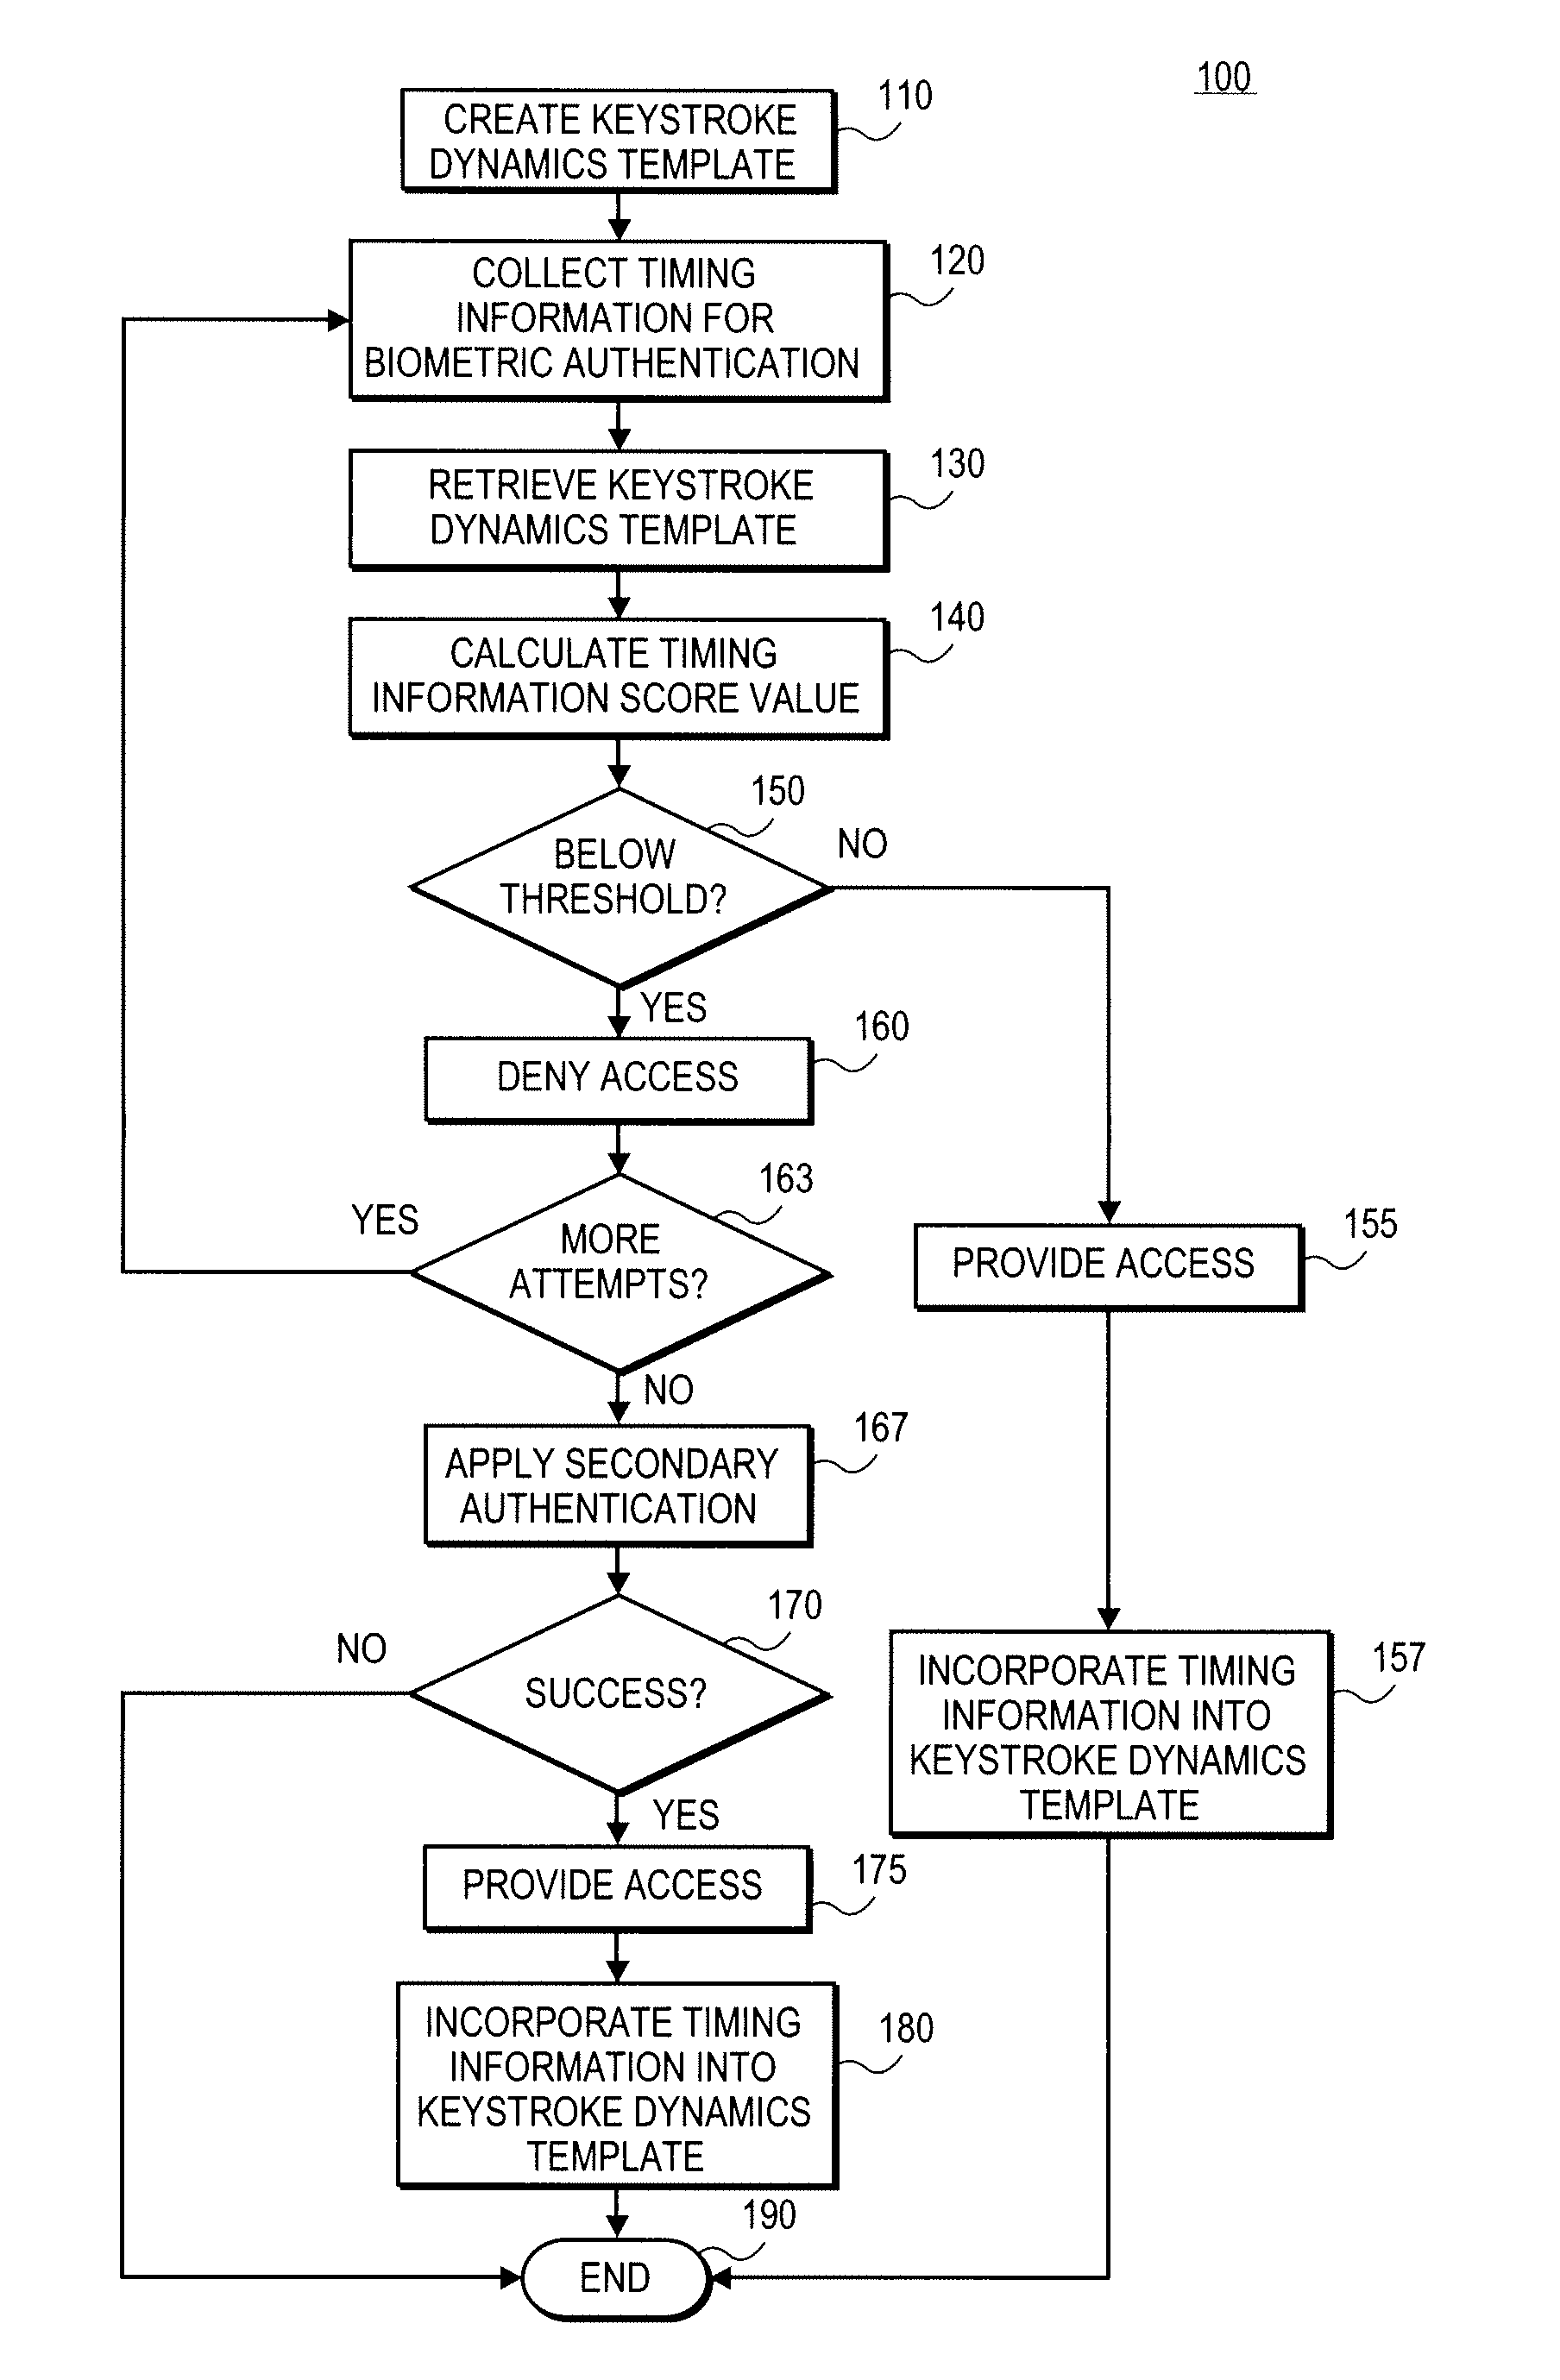 Incorporating false reject data into a template for user authentication